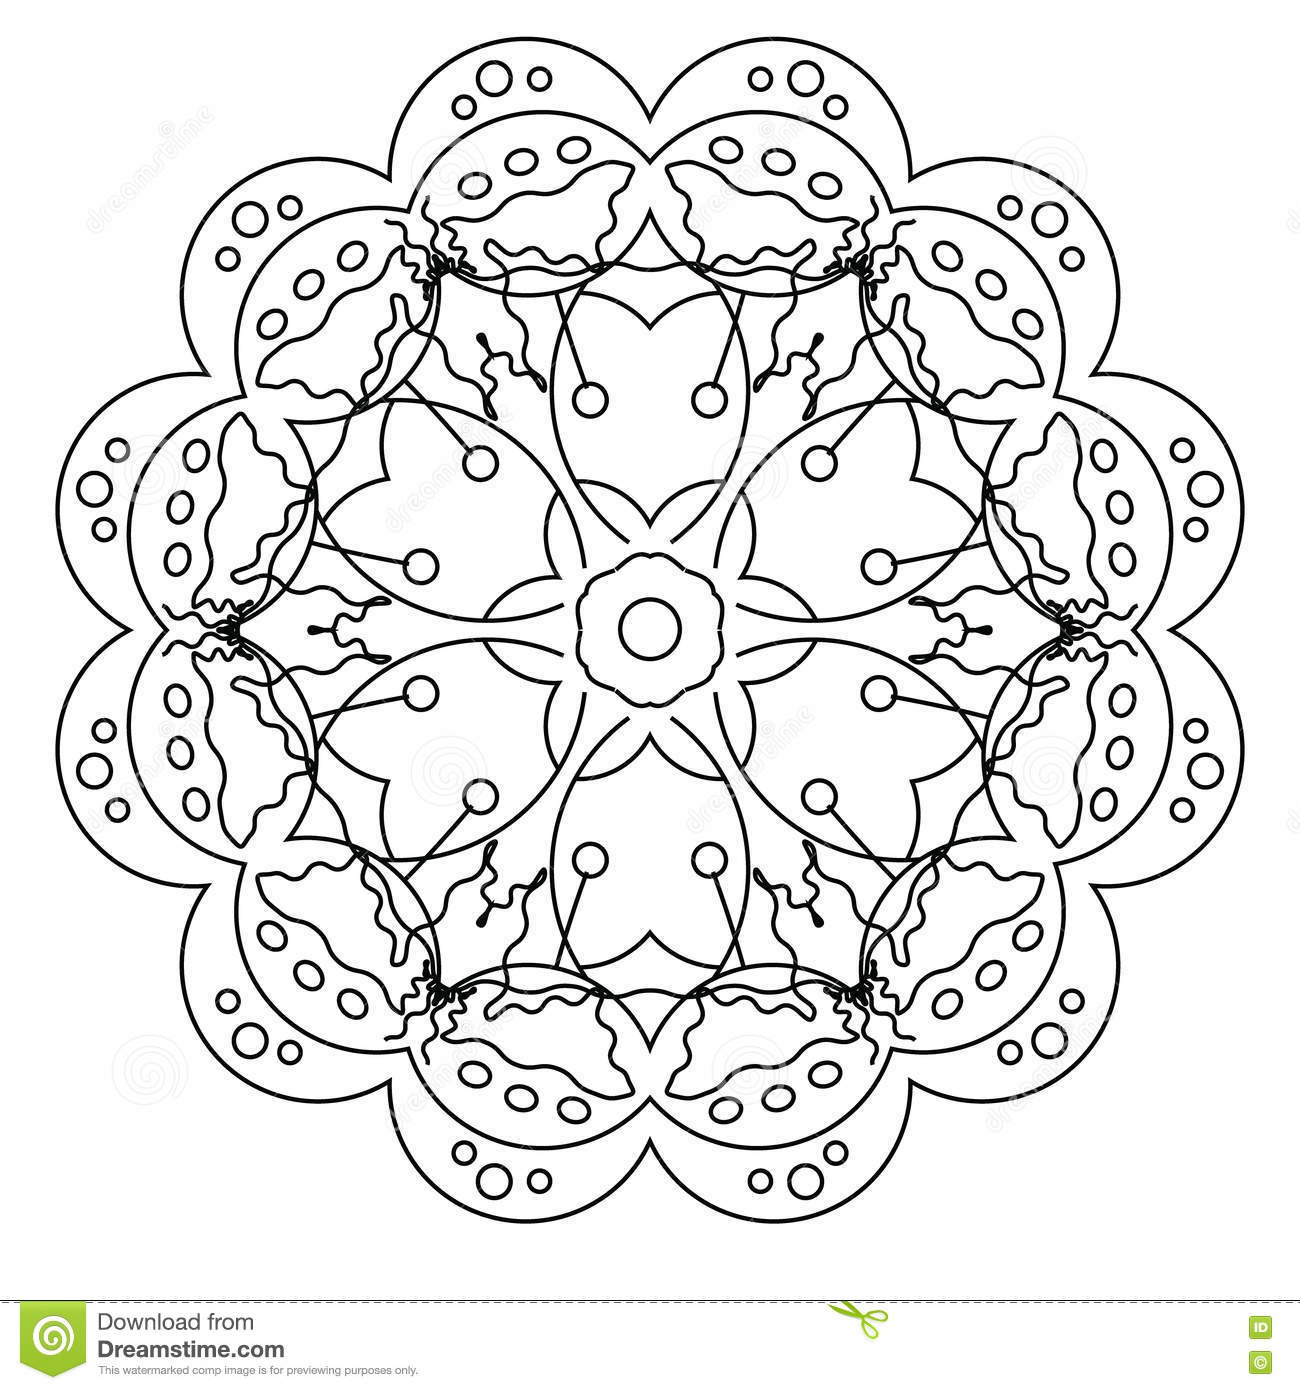 Coloring Therapy For Kids
 Relaxing Coloring Page With Mandala For Kids And Adults